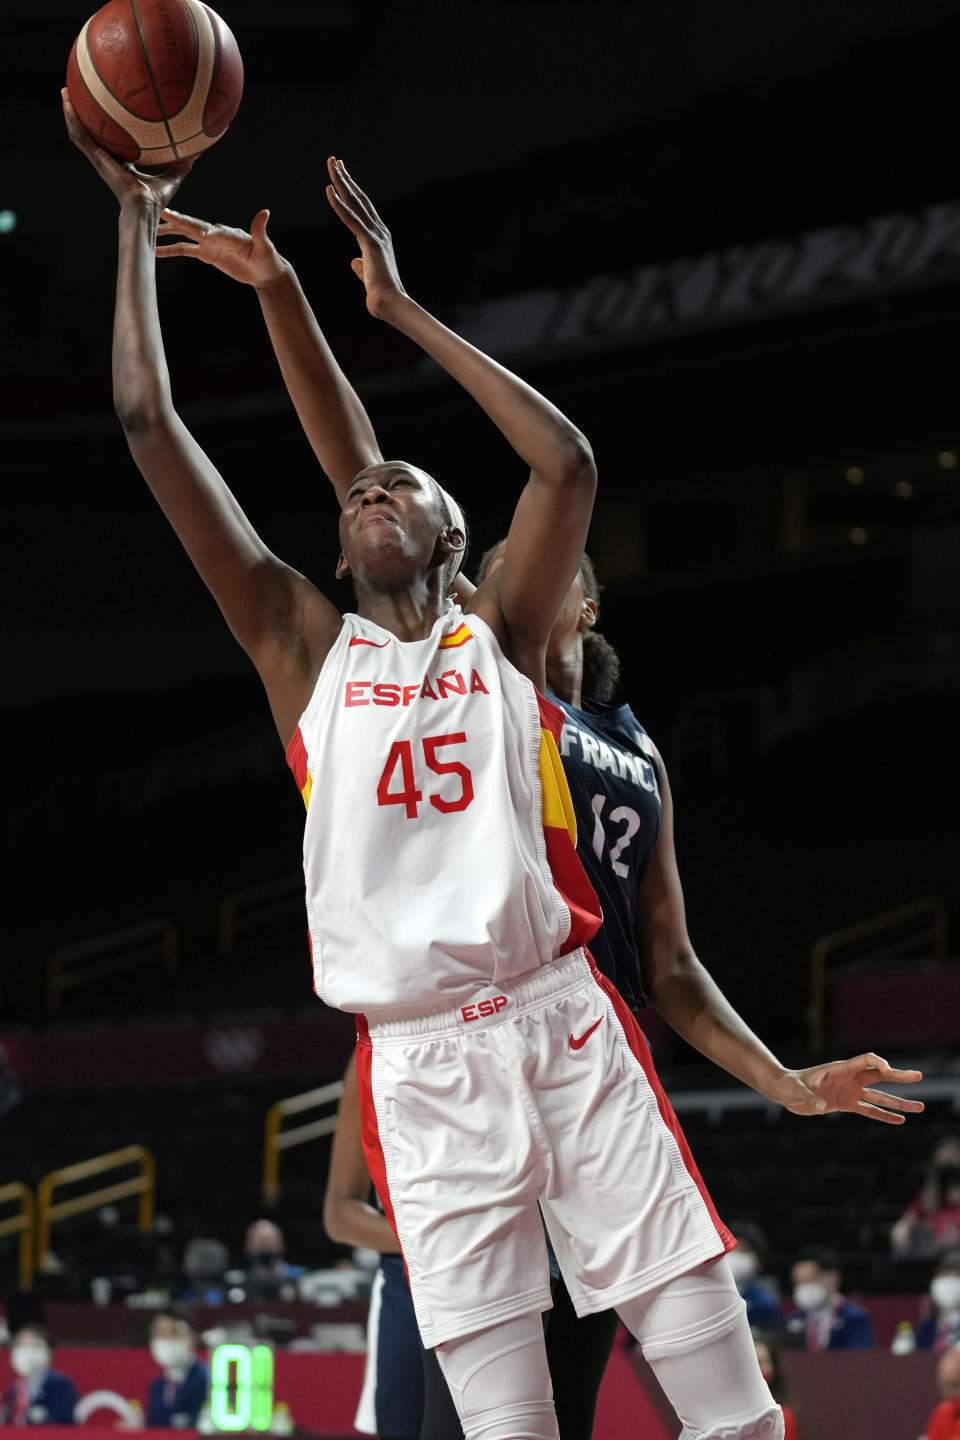 Spain's Astou Ndour (45) drives to the basket ahead of France's Iliana Rupert (12) during a women's basketball quarterfinal round game at the 2020 Summer Olympics, Wednesday, Aug. 4, 2021, in Saitama, Japan. (AP Photo/Eric Gay)